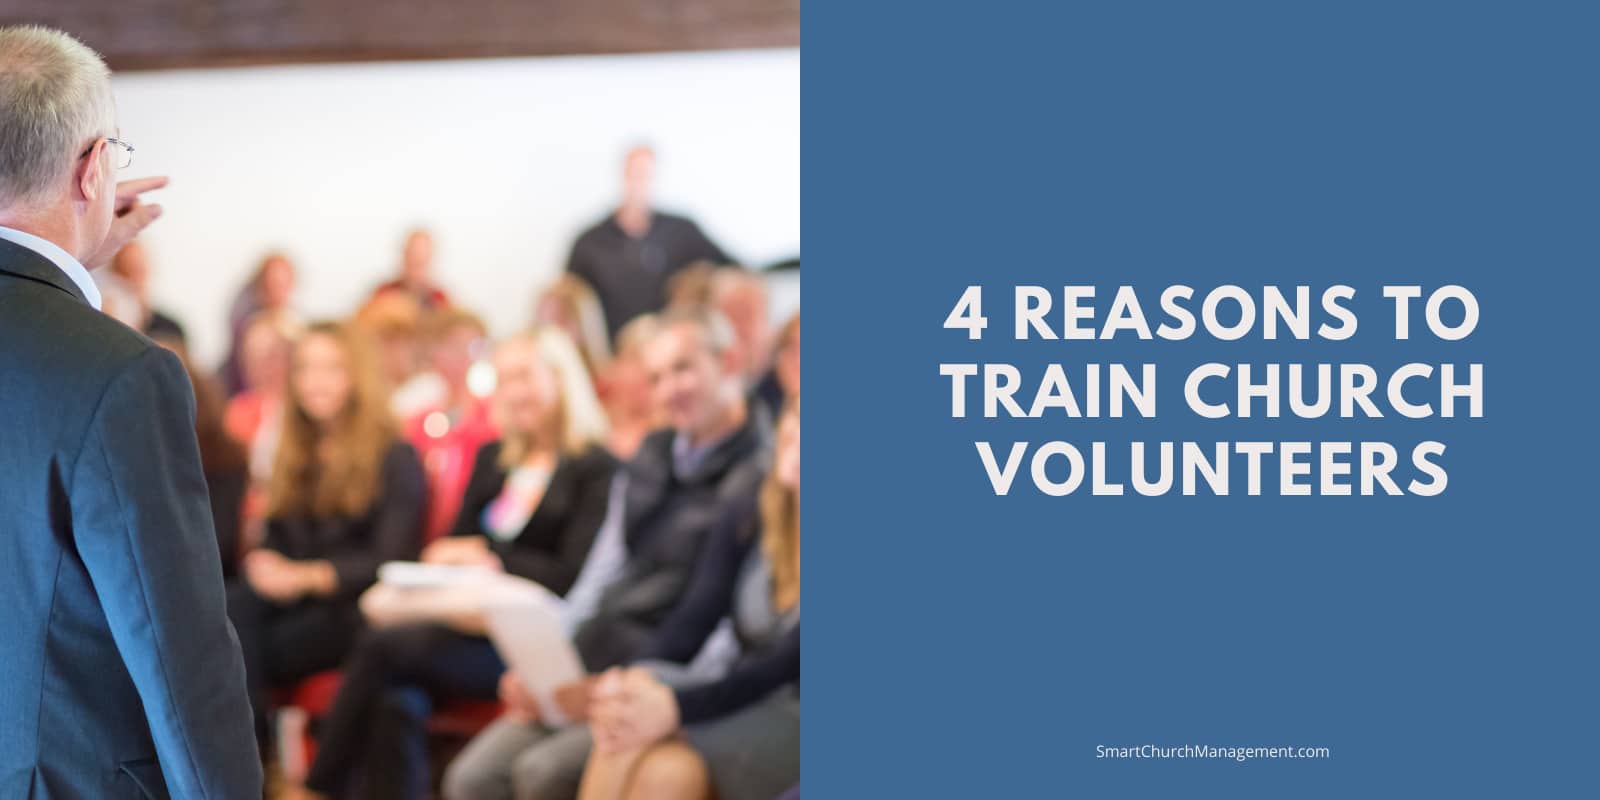 is it important to train church volunteers